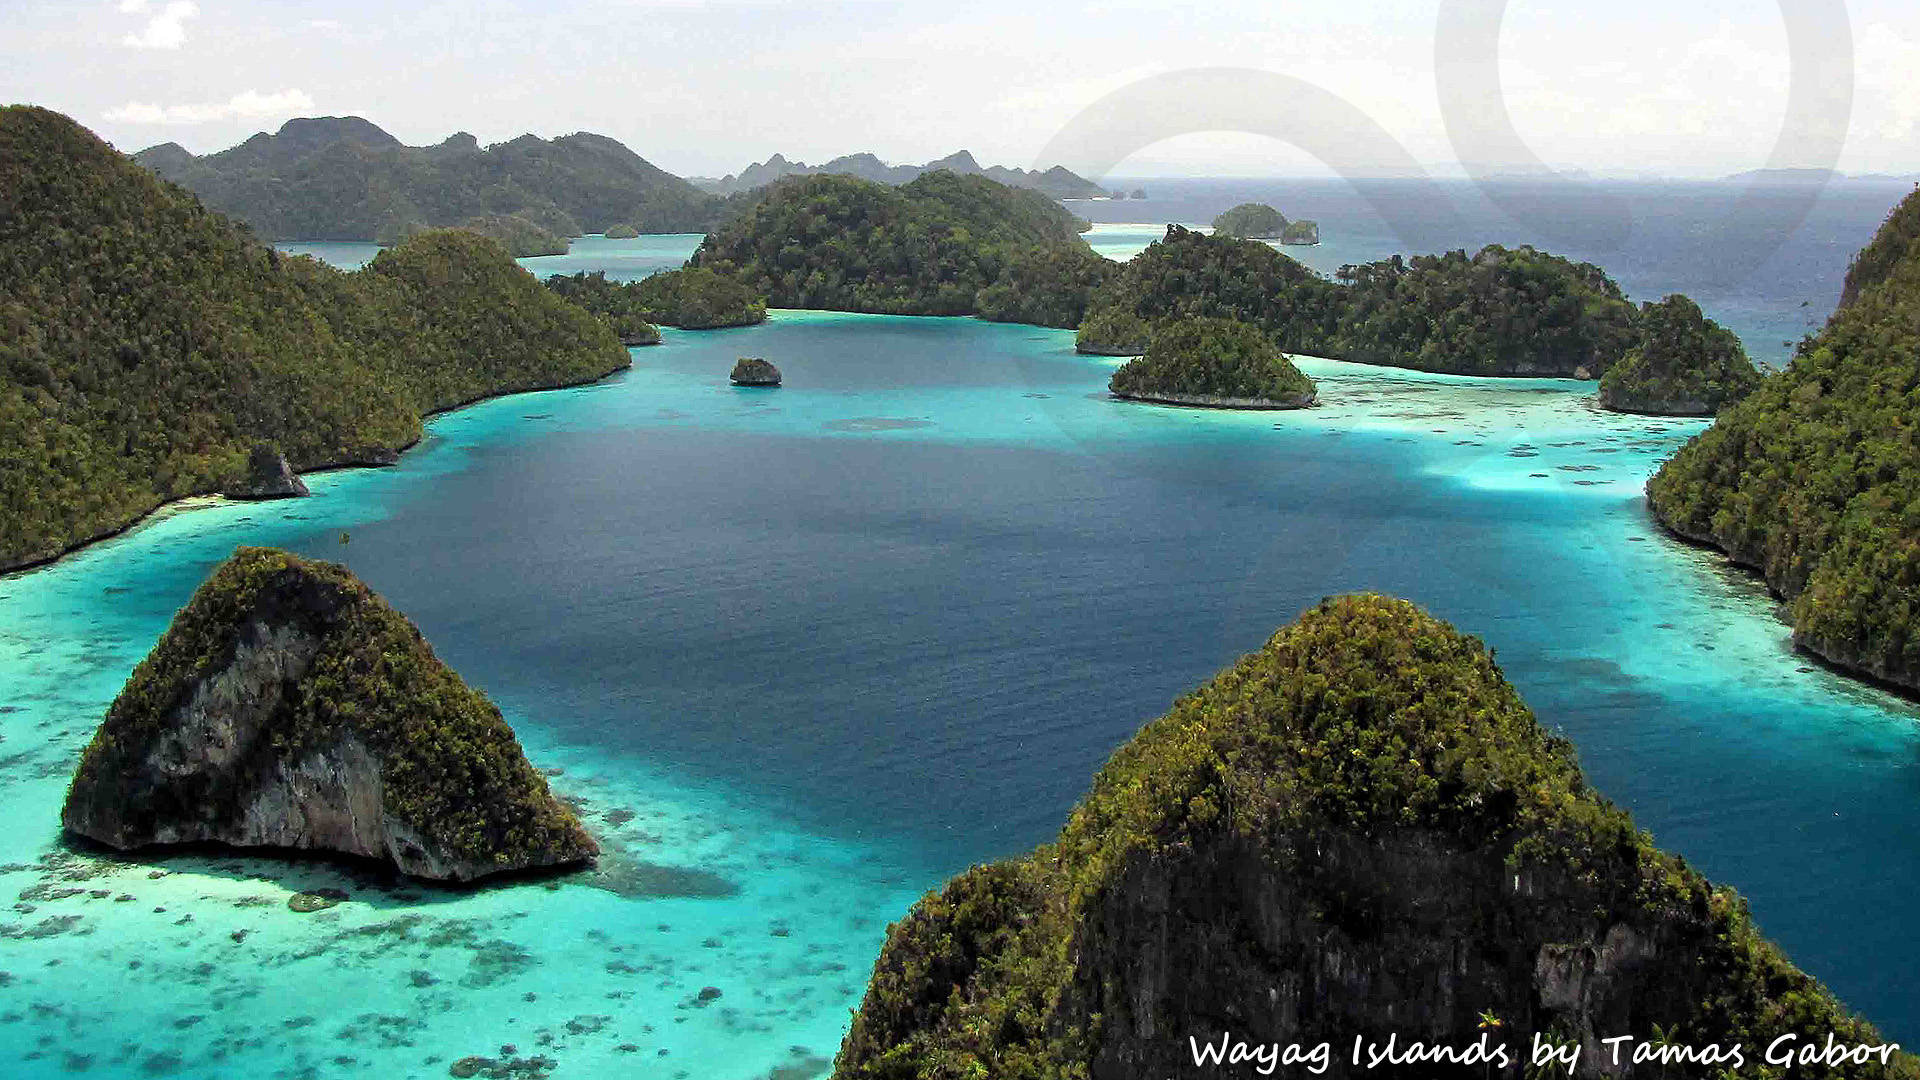 This panoramic view of limestone pinnacles and deeply undercut, toadstool-shaped islets in the Wayag group off northwestern Waigeo Island has become an iconic image of Raja Ampat. Copyright © Tamas Gabor